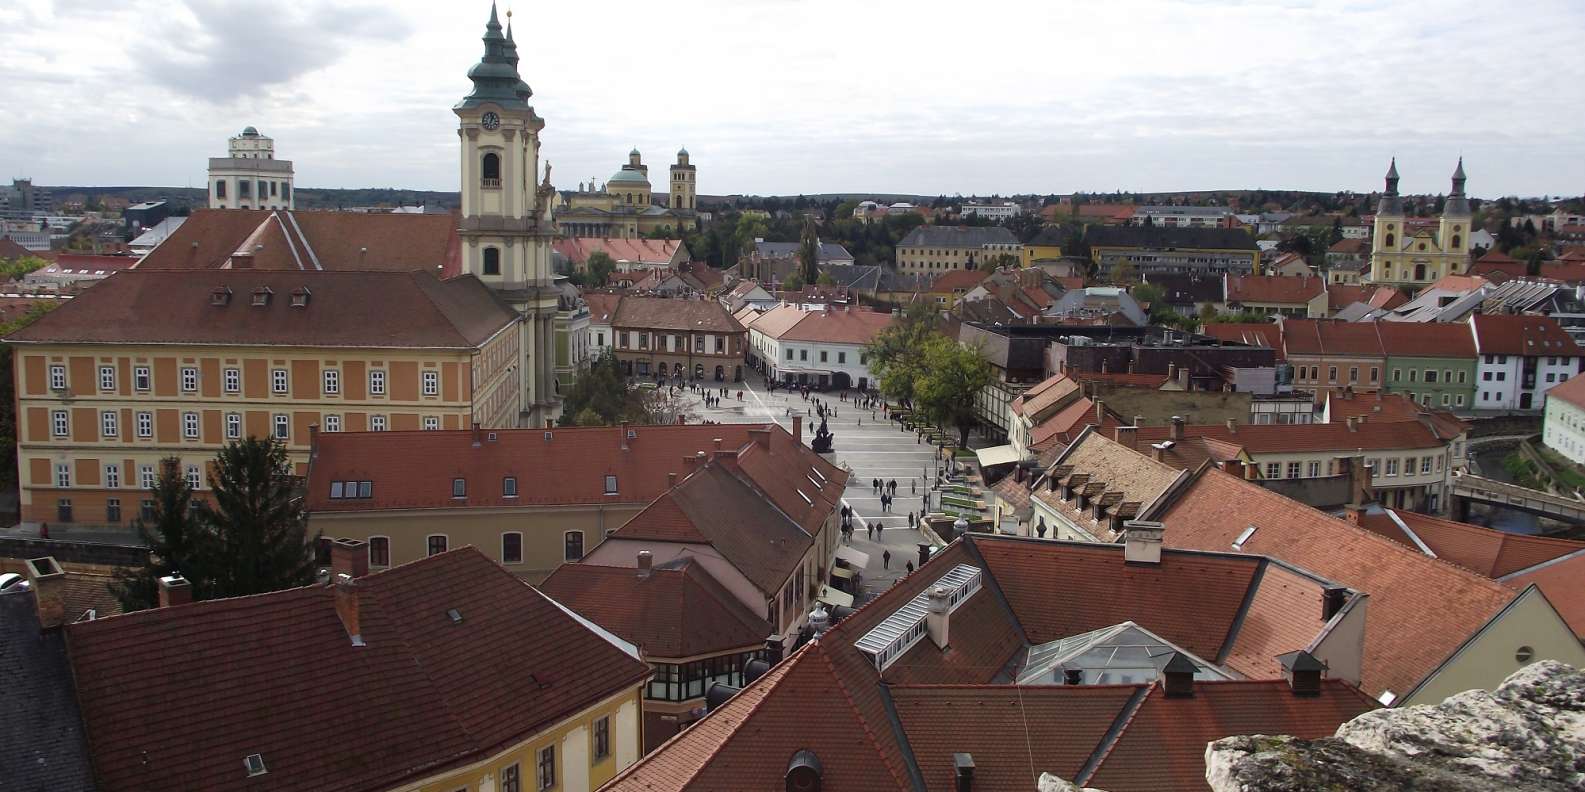 What to do in Eger